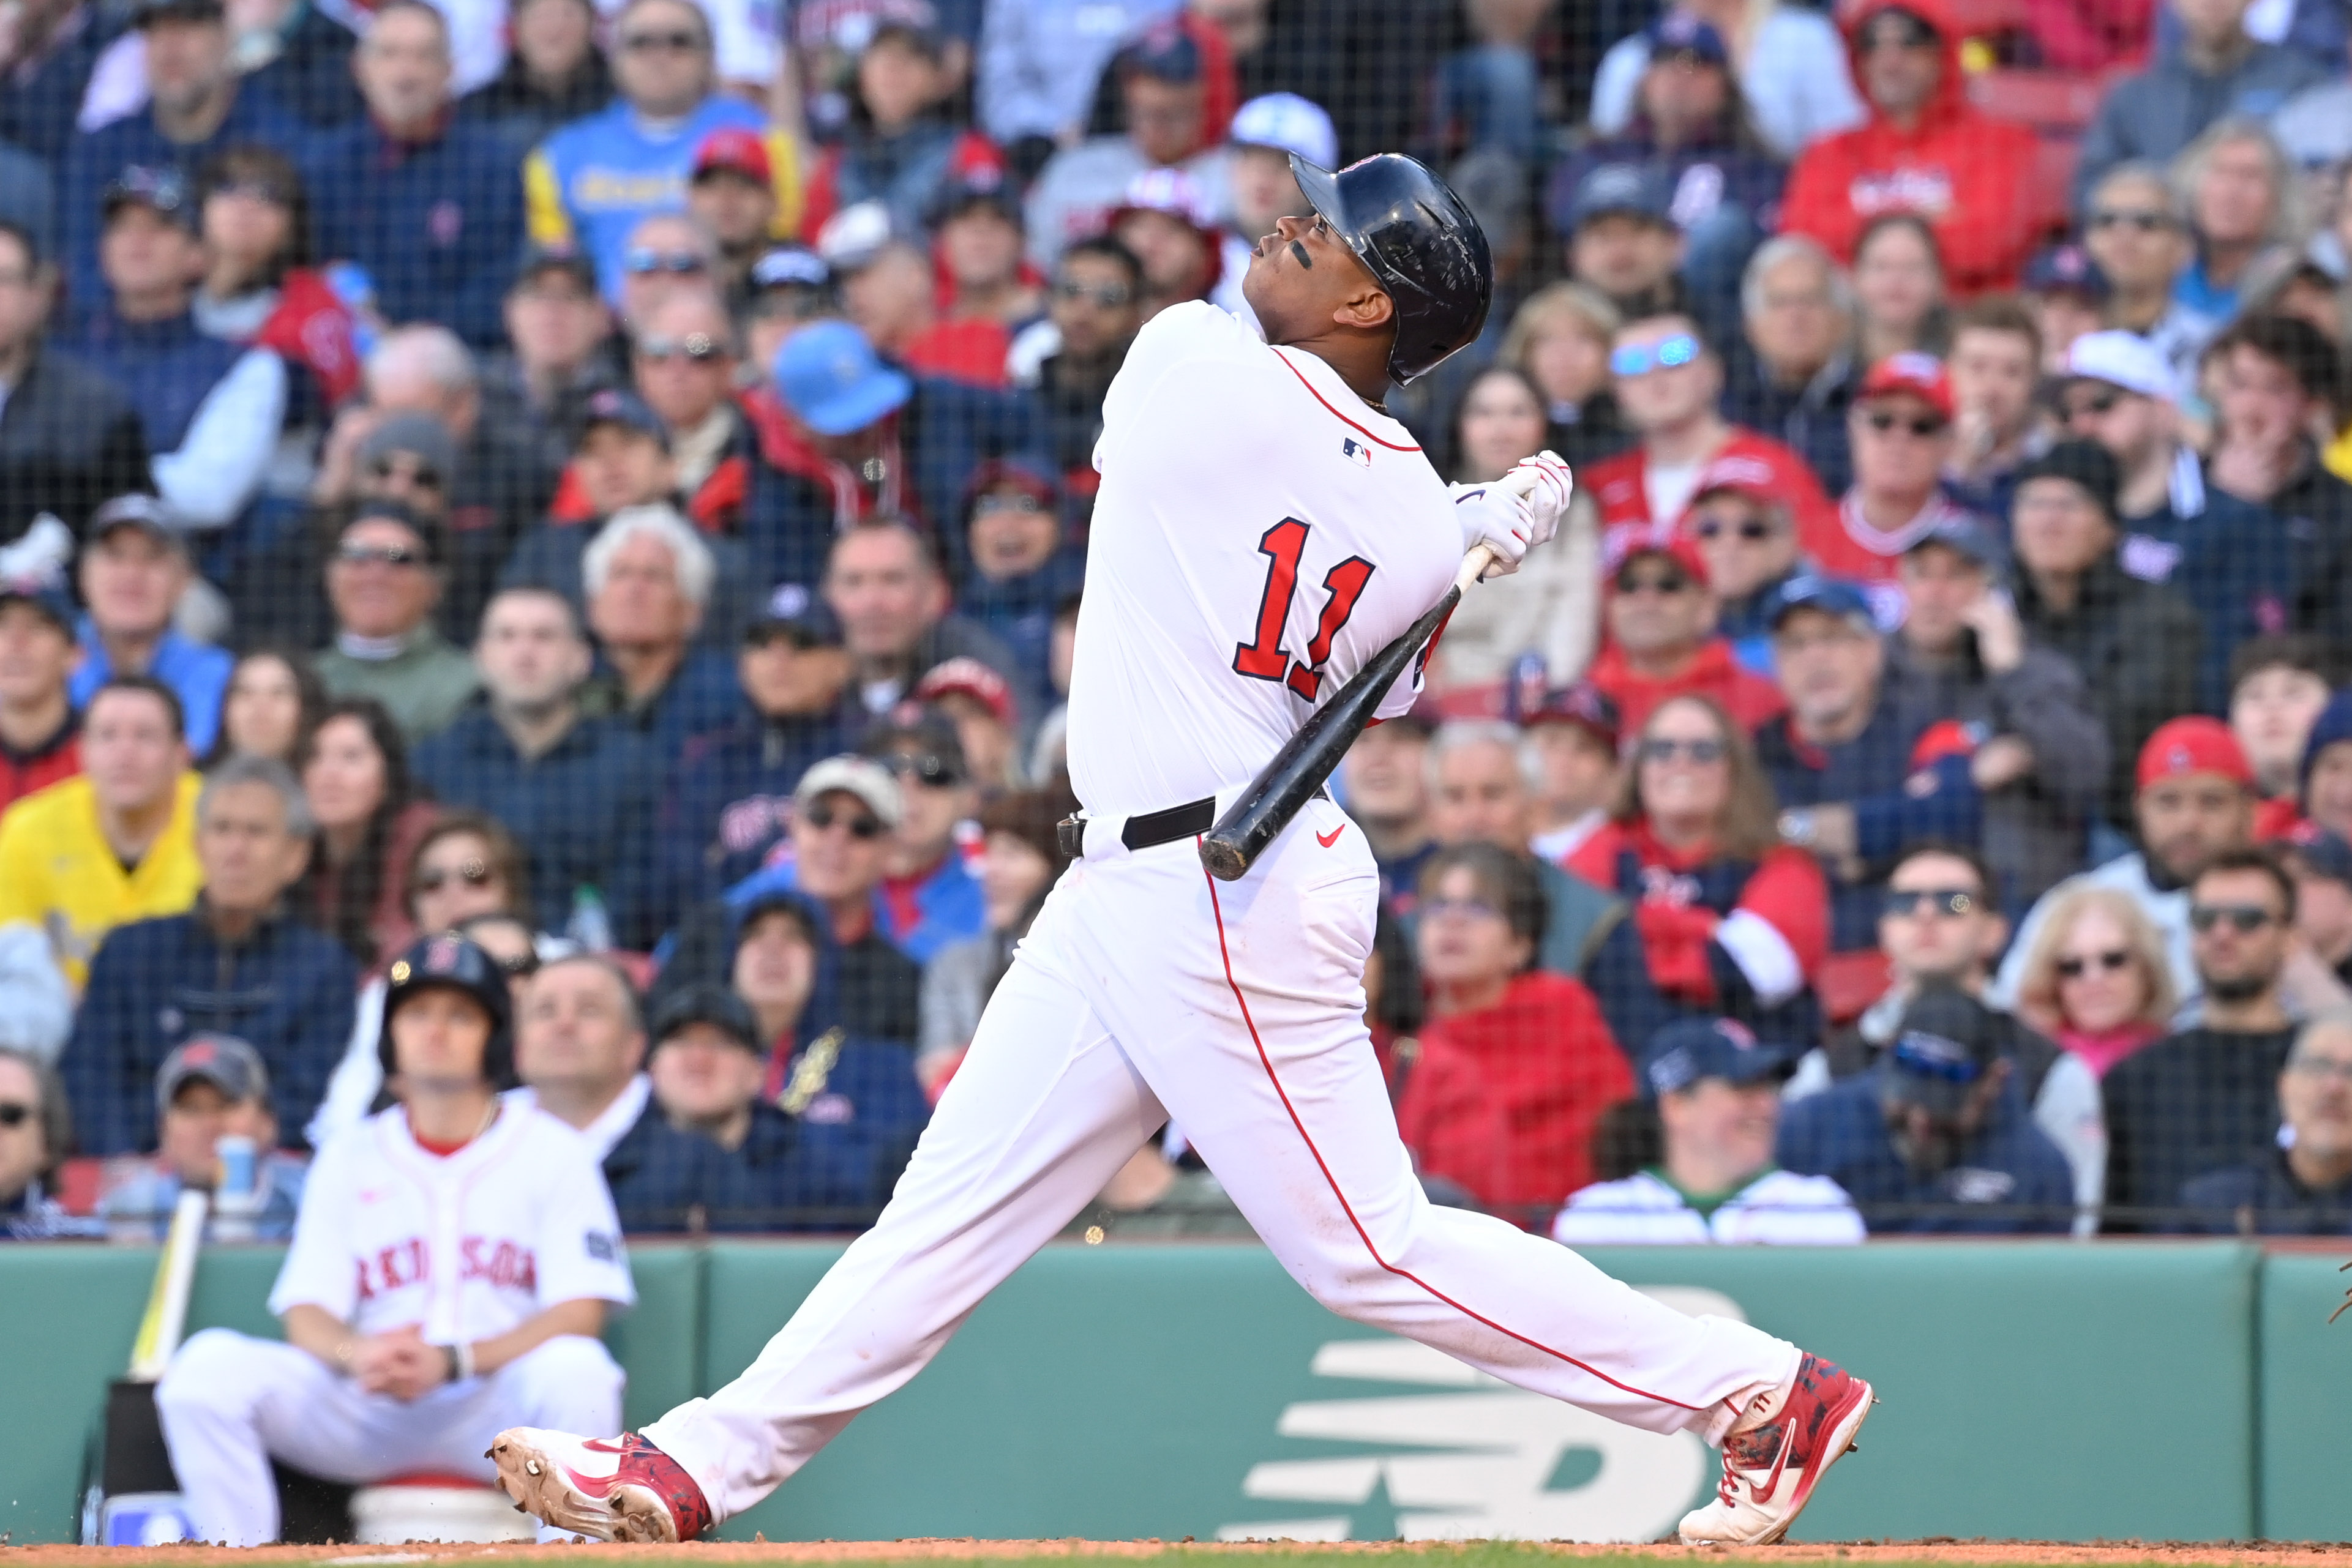 Rafael Devers crushes a double, giving the Red Sox the lead!